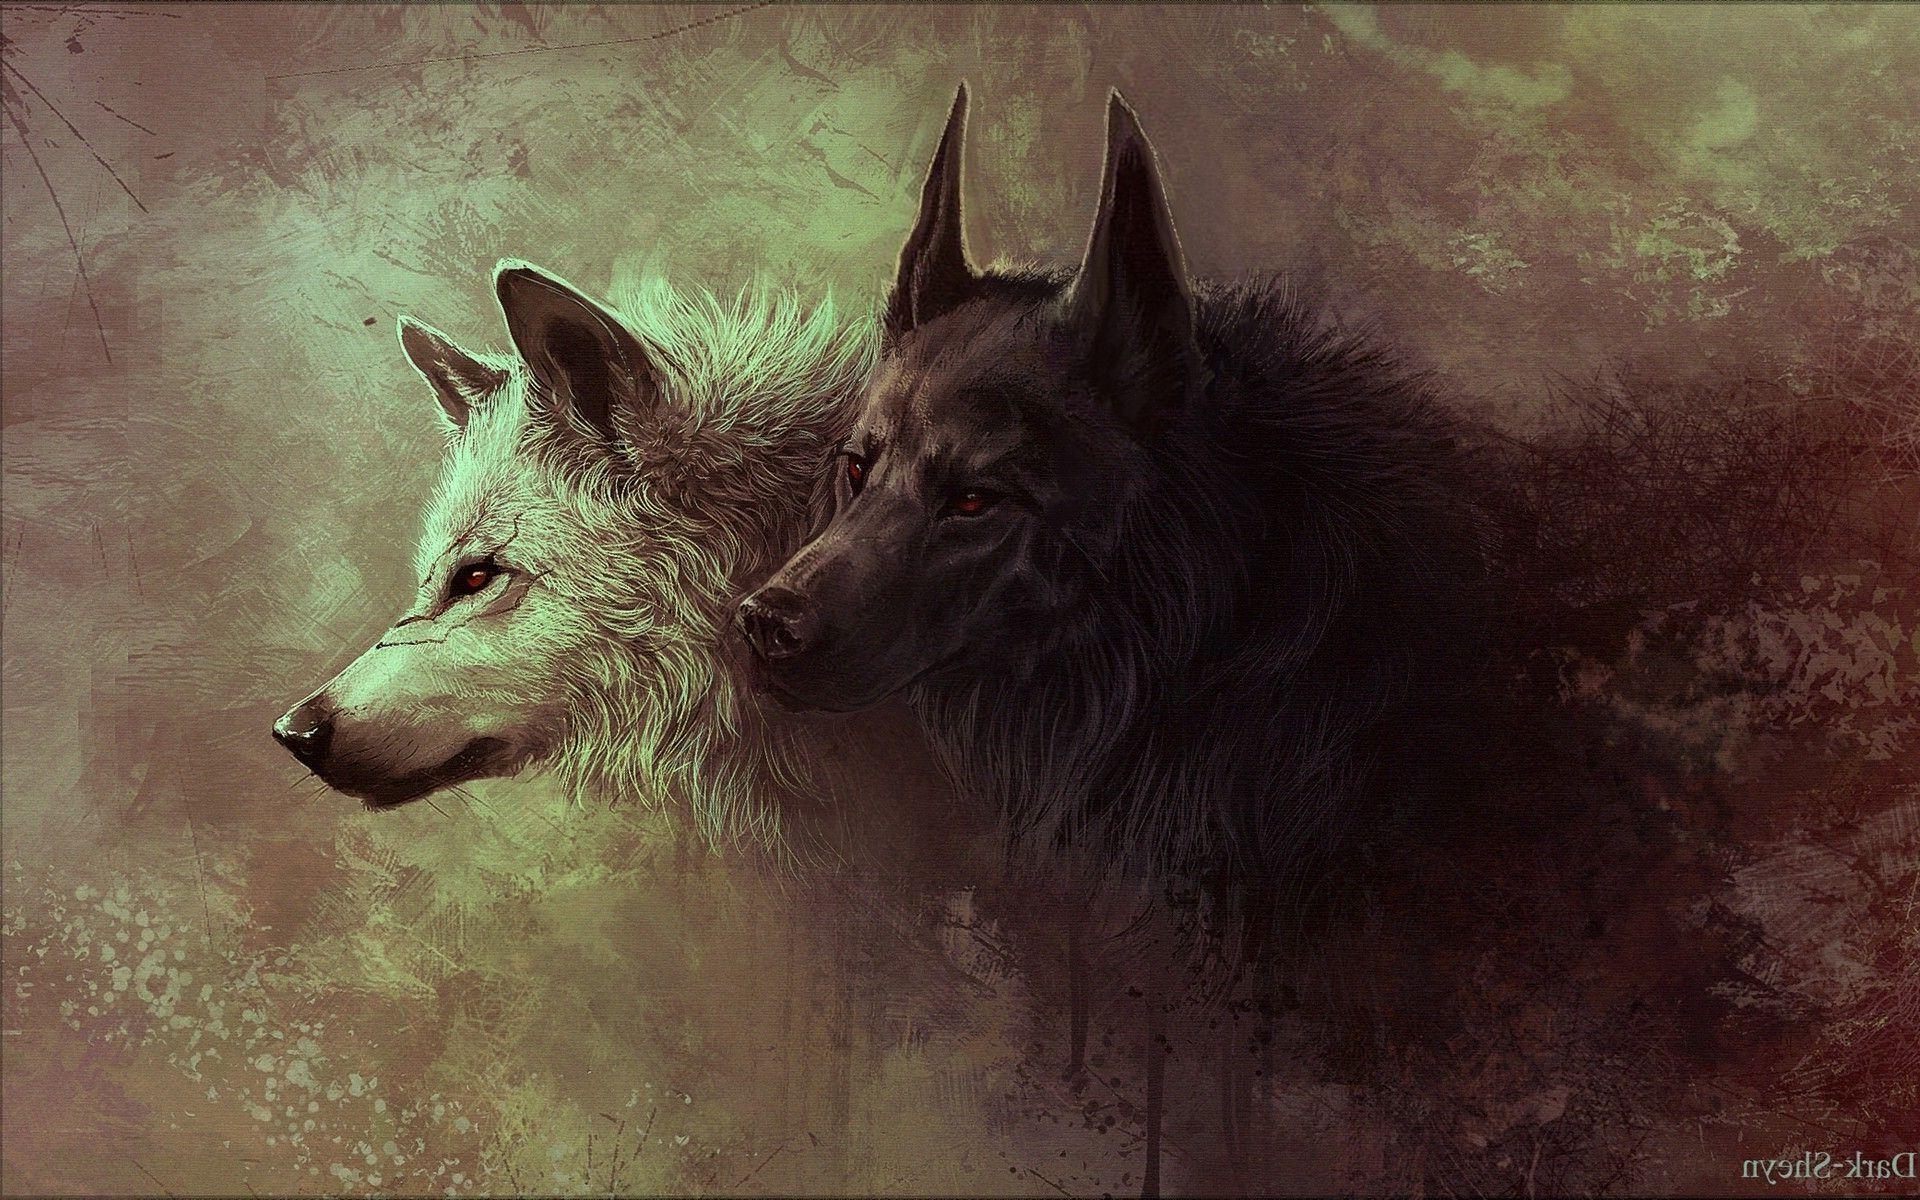 The actions of a young wolf will corrupt the balance and place